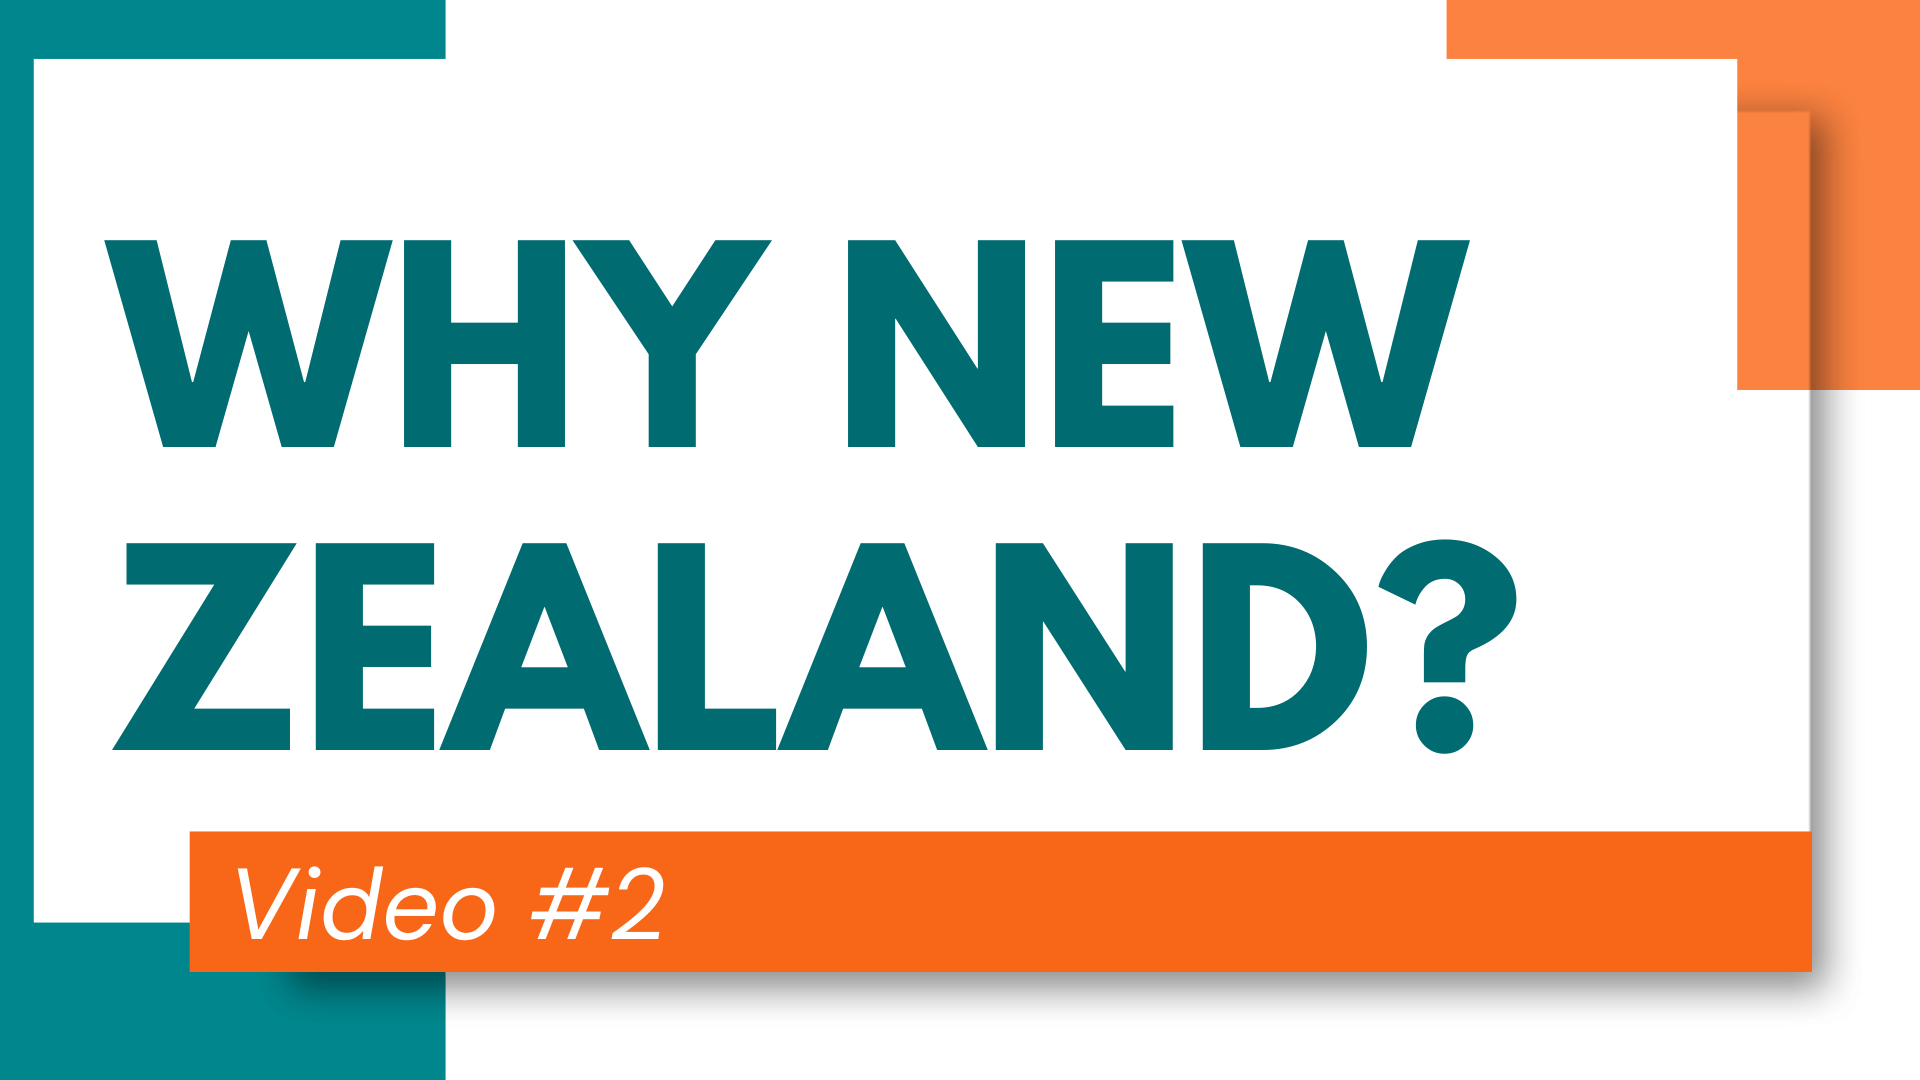 2. Why New Zealand?